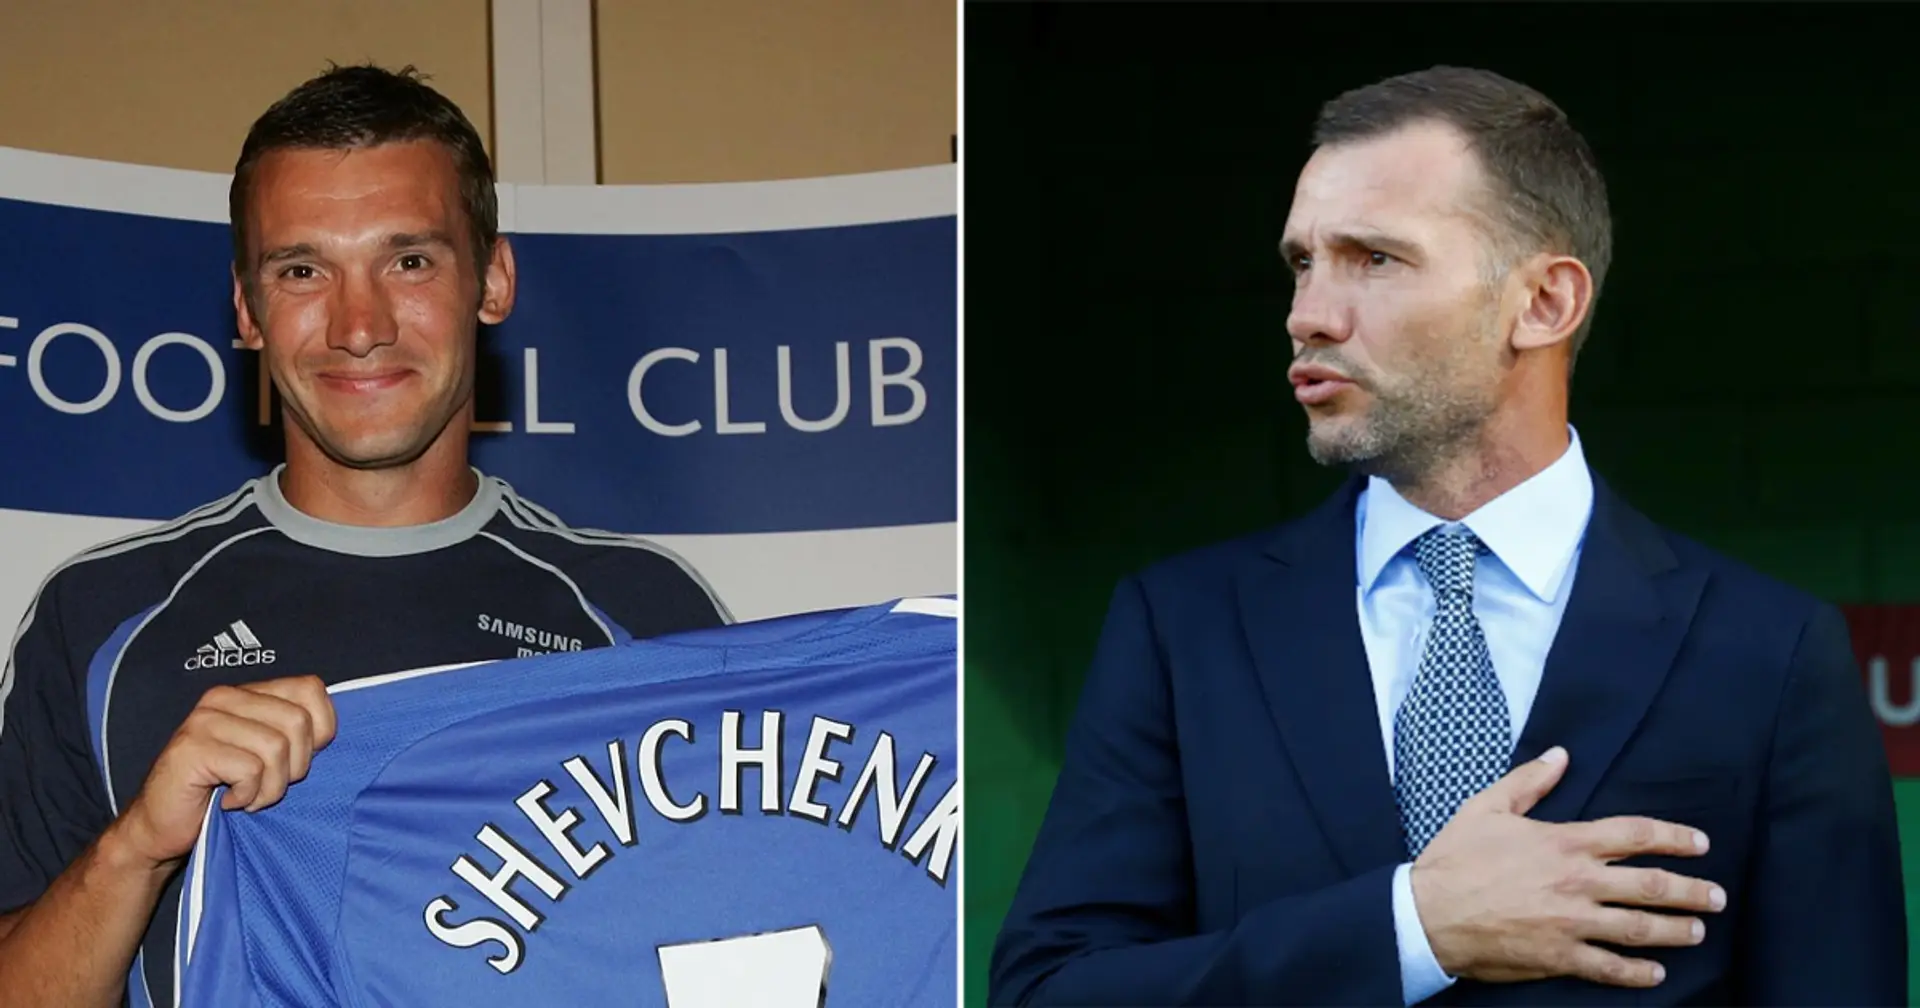 Andriy Shevchenko leaves role as Ukraine manager: why it might matter for Chelsea in long term - explained